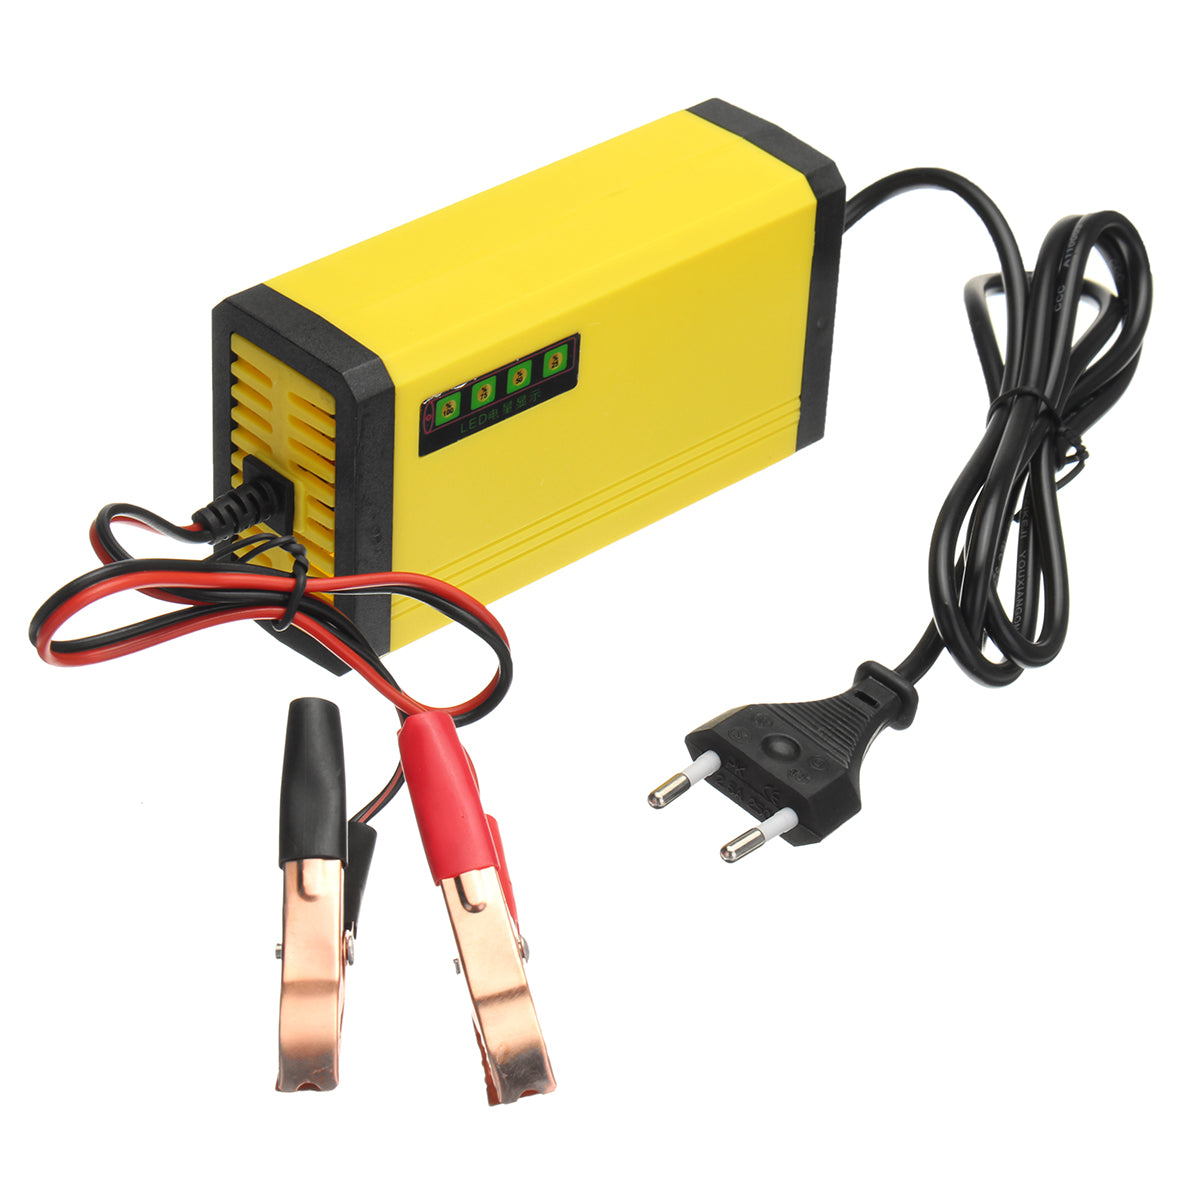 Goldenrod 12V 2AH-20AH Smart Automatic ABS Battery Charger US/EU Plug For Car Motorcycle